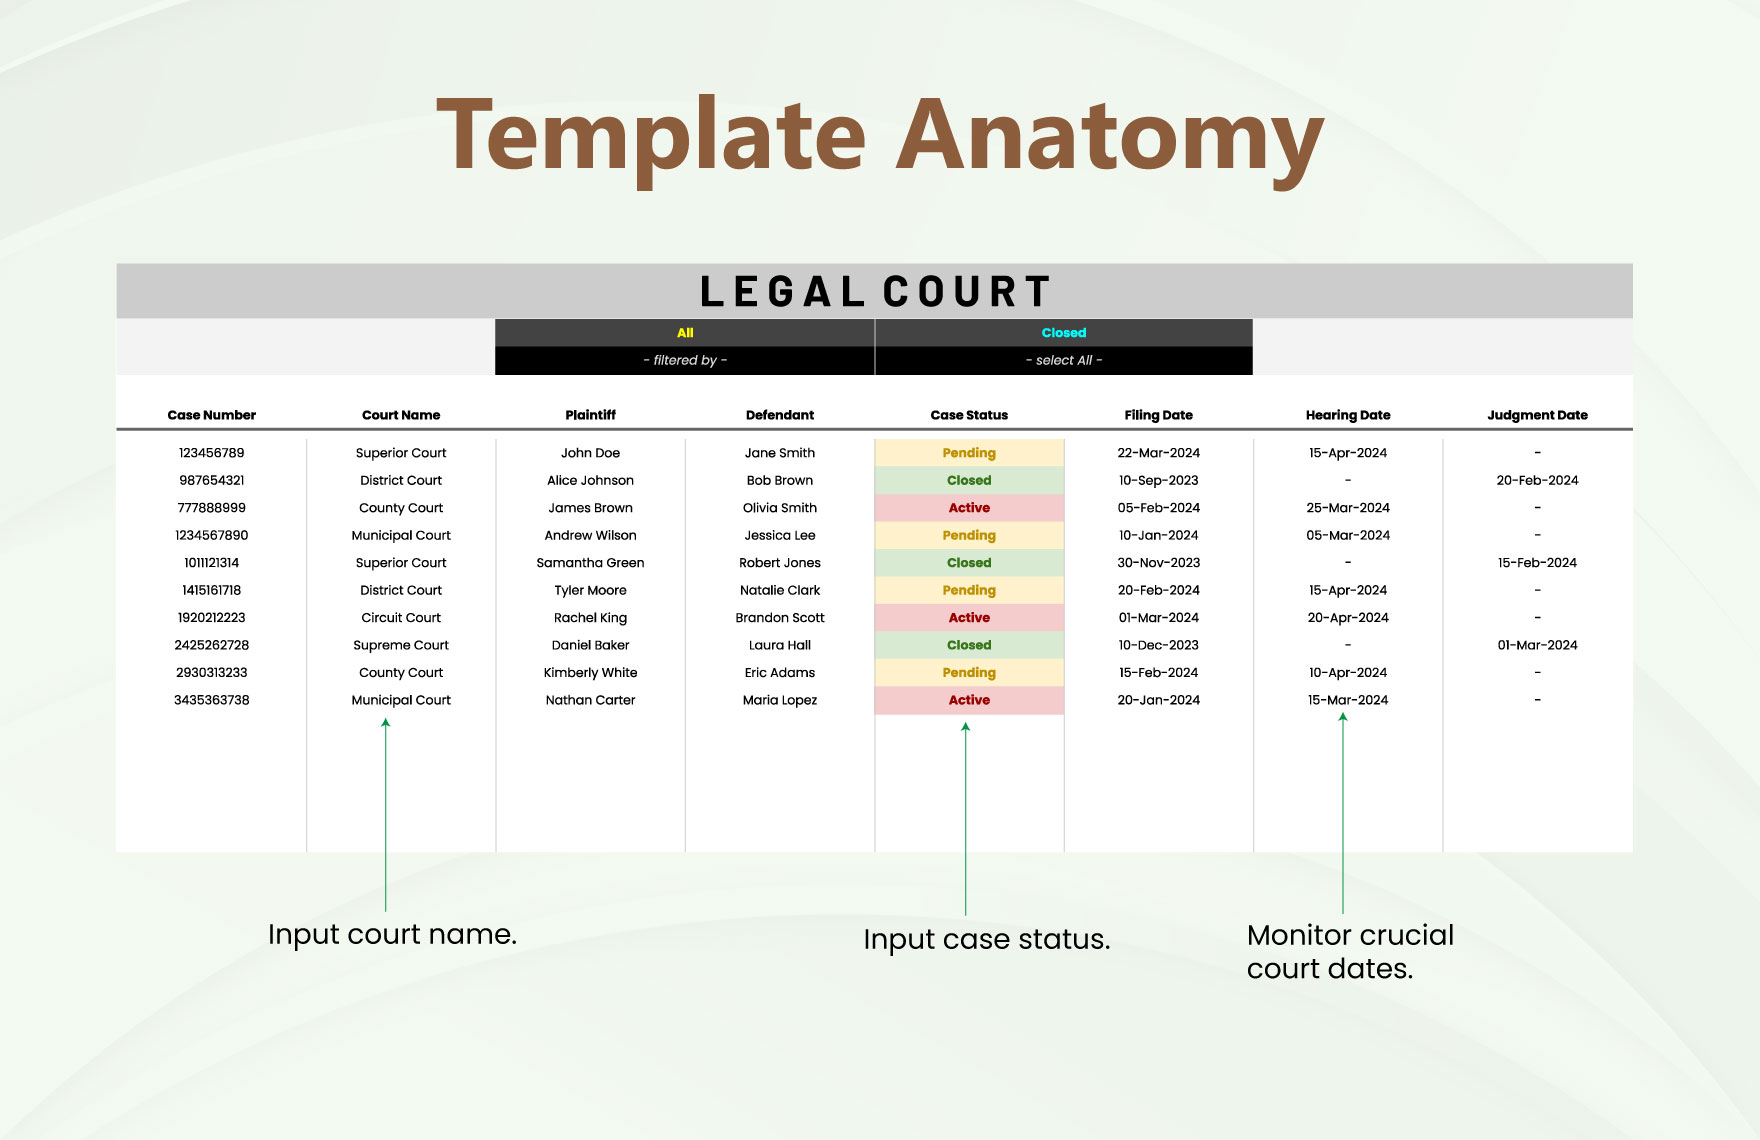 Legal Court Template